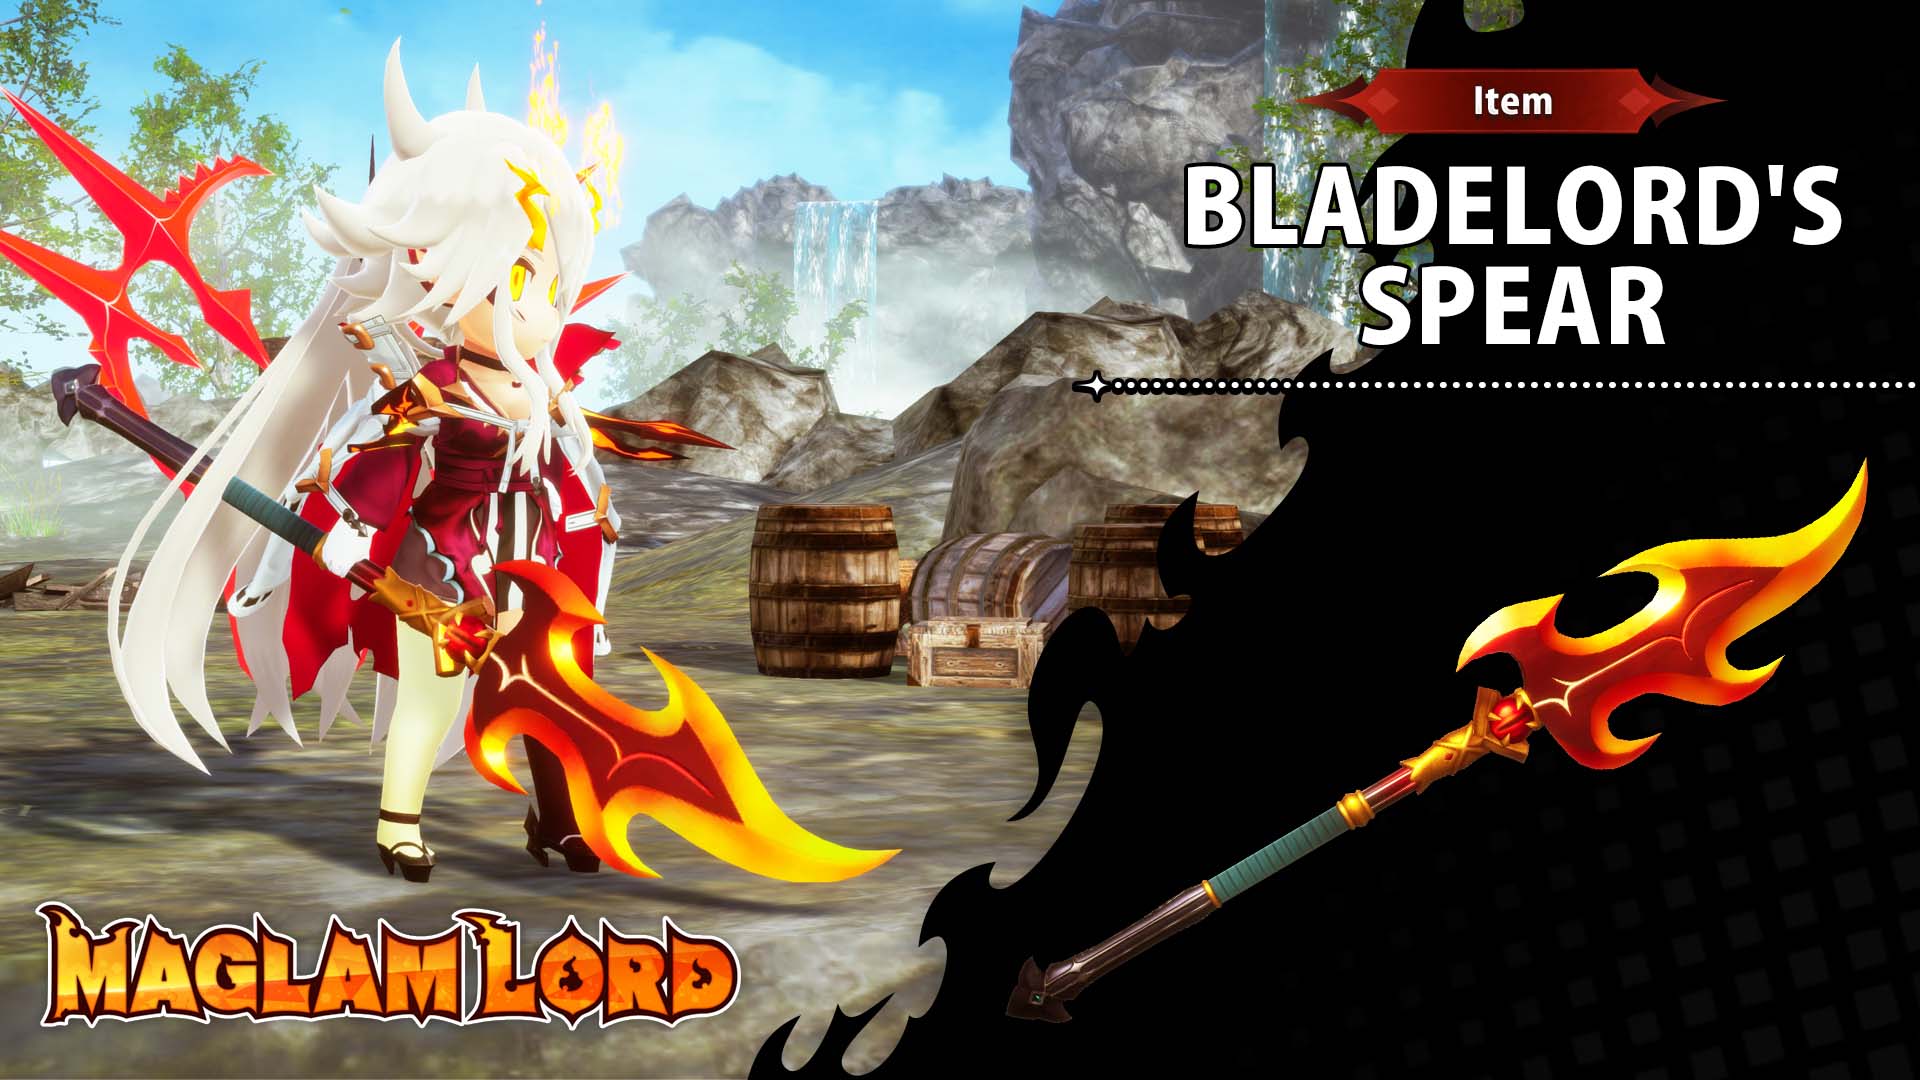 Deco: Bladelord's Spear